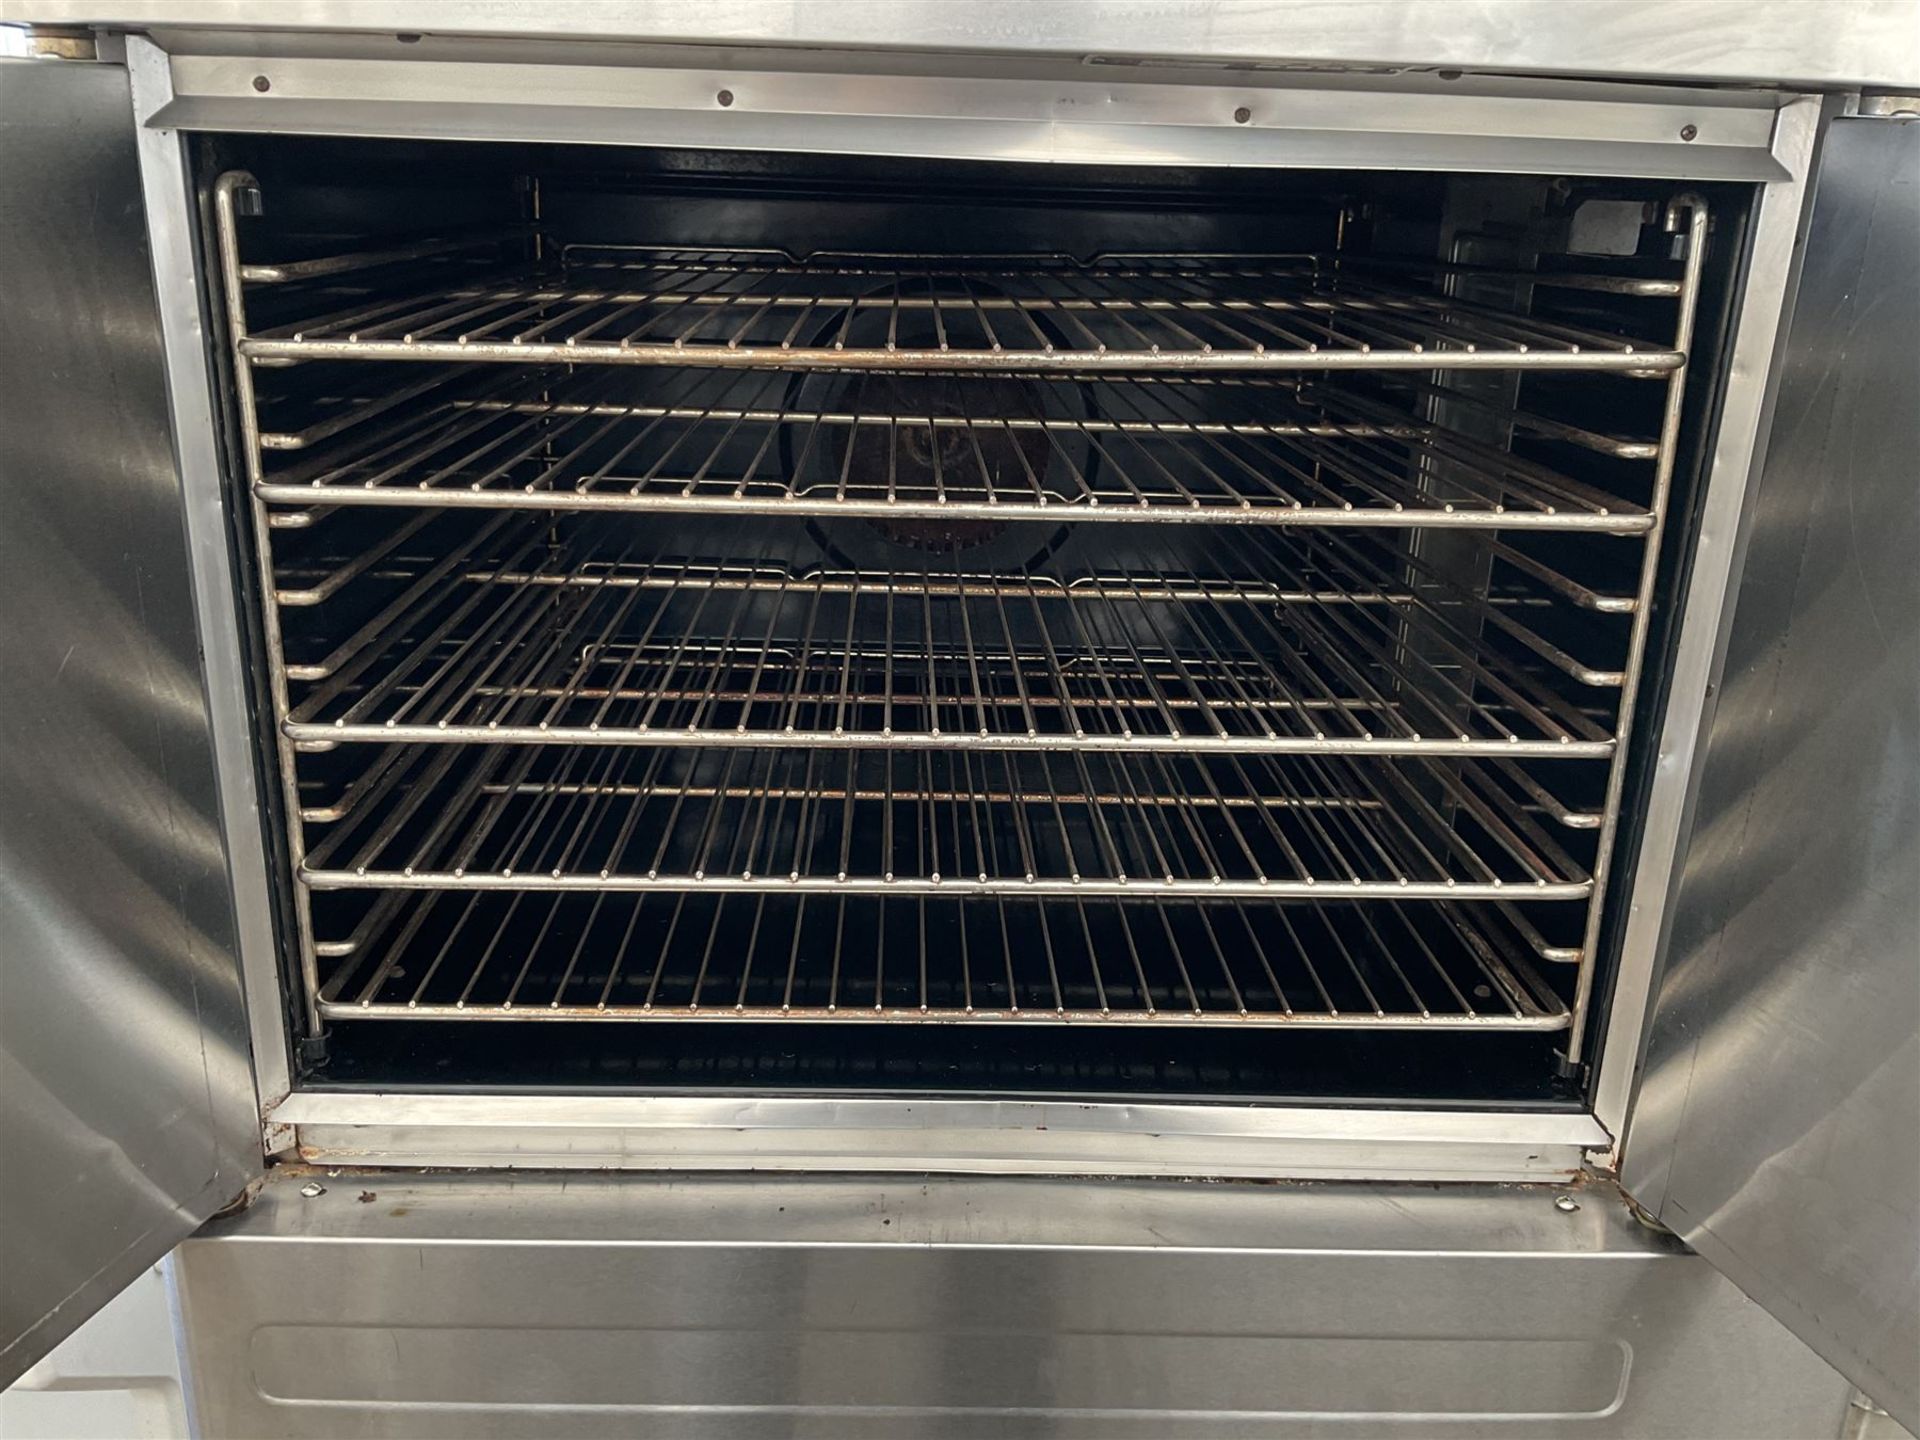 Blodgett - Zephaire commercial stainless steel double door convection baking oven - Image 3 of 7